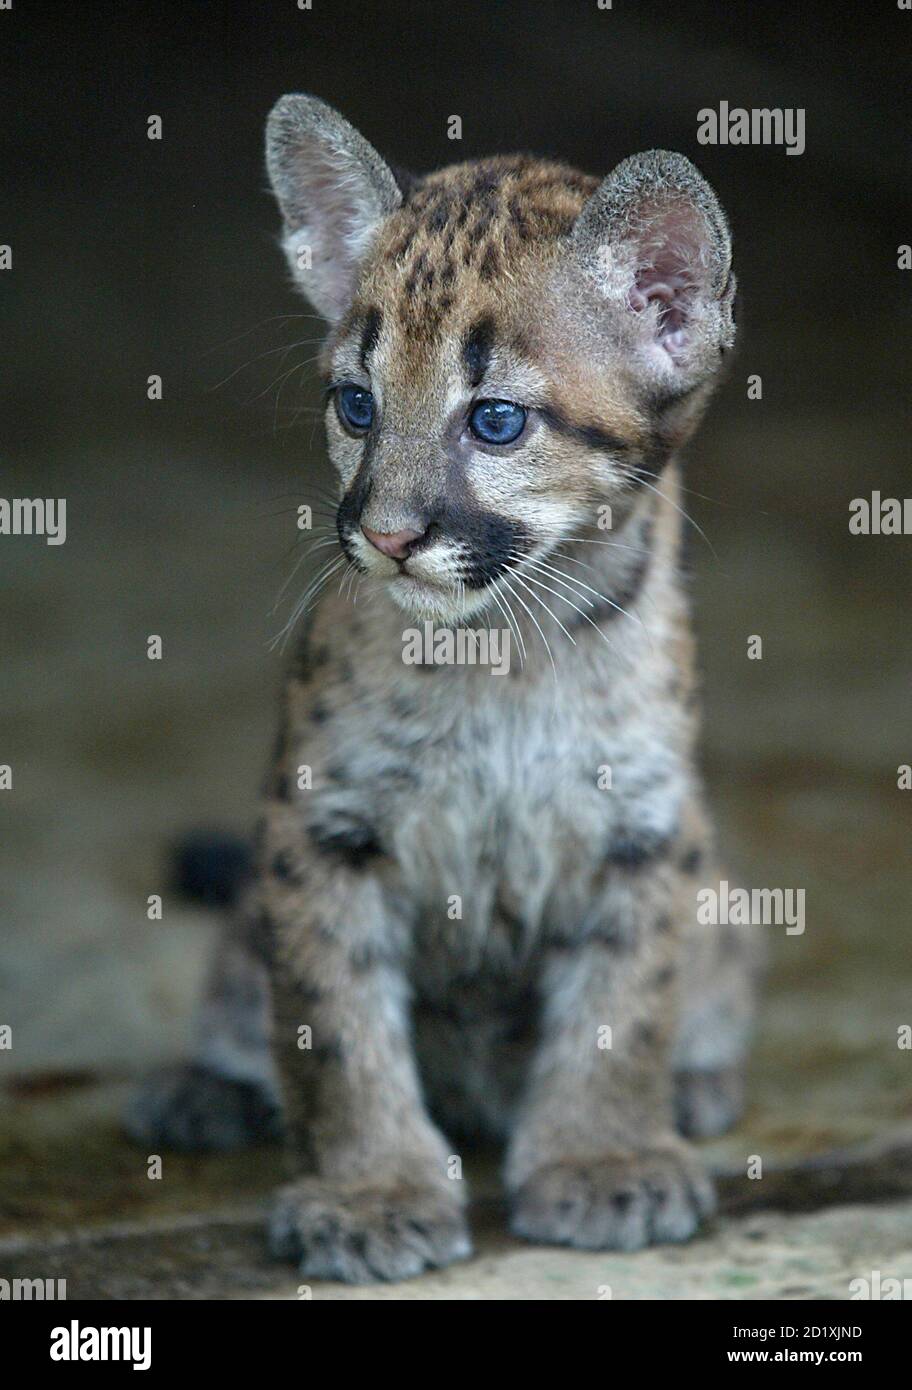 A baby puma cub born in captivity and considered an endangered species is  seen at the National Zoo in Managua October 2, 2007. REUTERS/Oswaldo Rivas  (NICARAGUA Fotografía de stock - Alamy